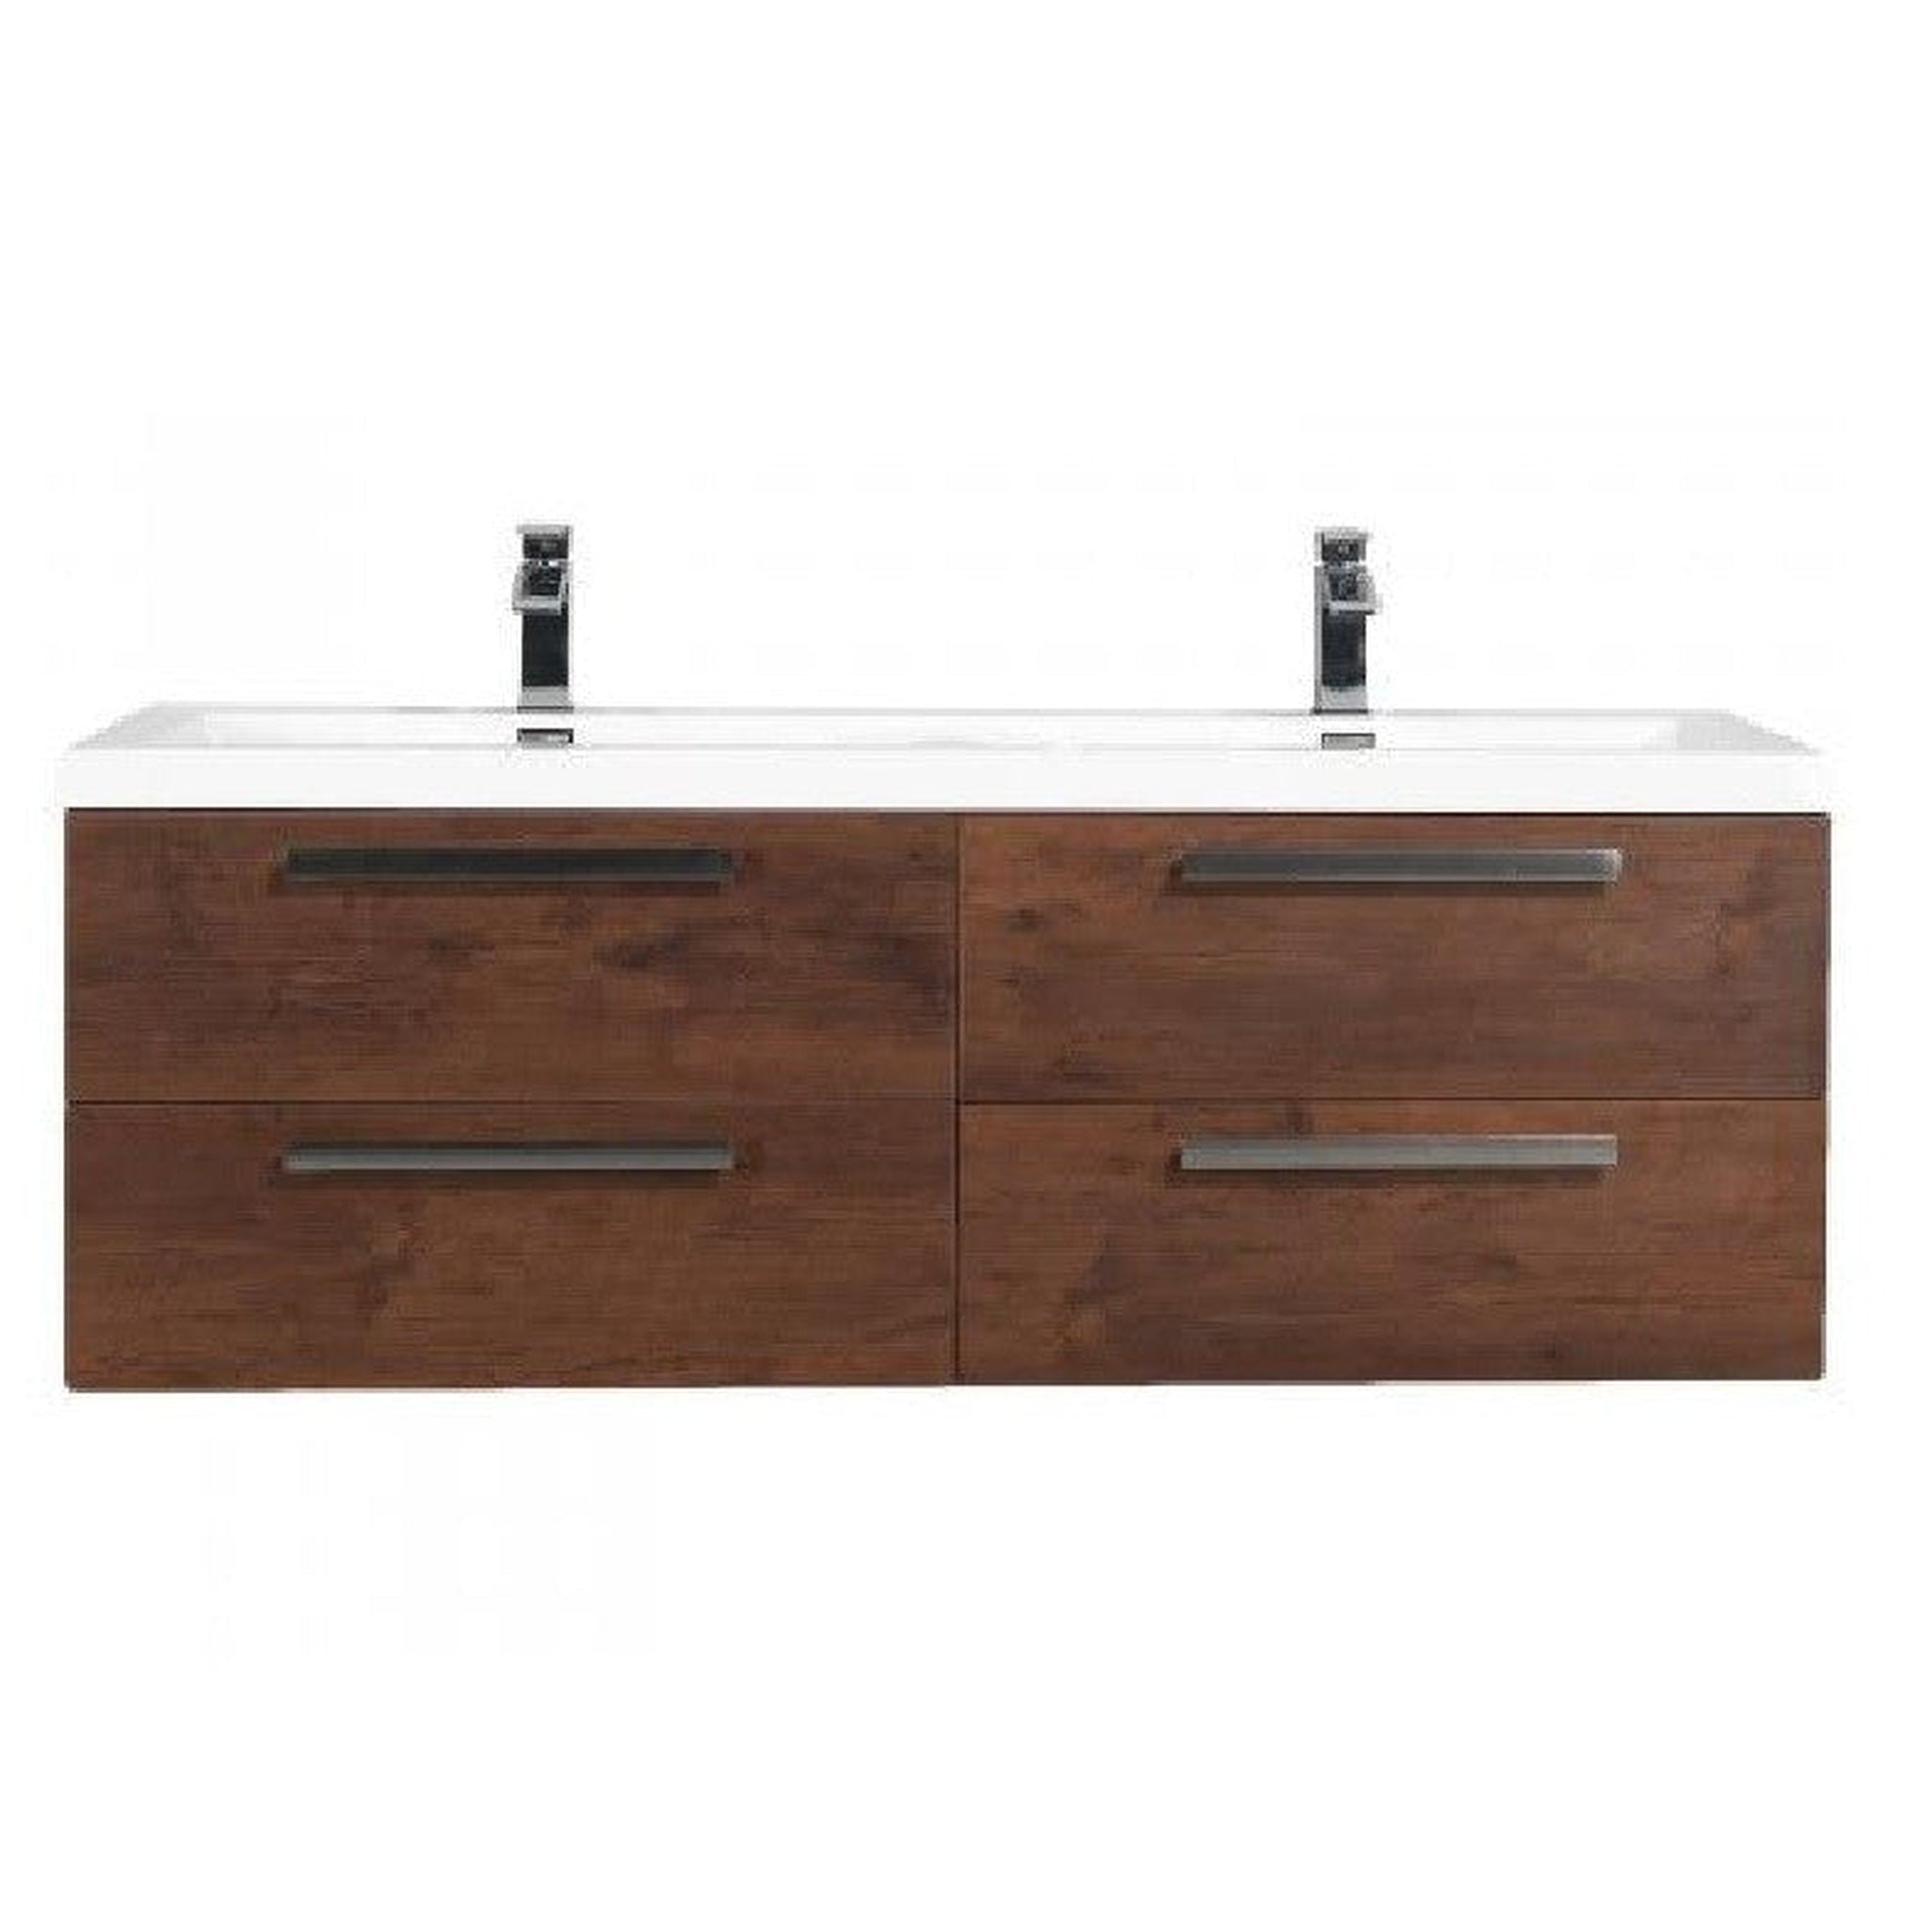 Eviva, Eviva Surf 57" x 24" Rosewood Wall-Mounted Bathroom Vanity With Double White Integrated Sink